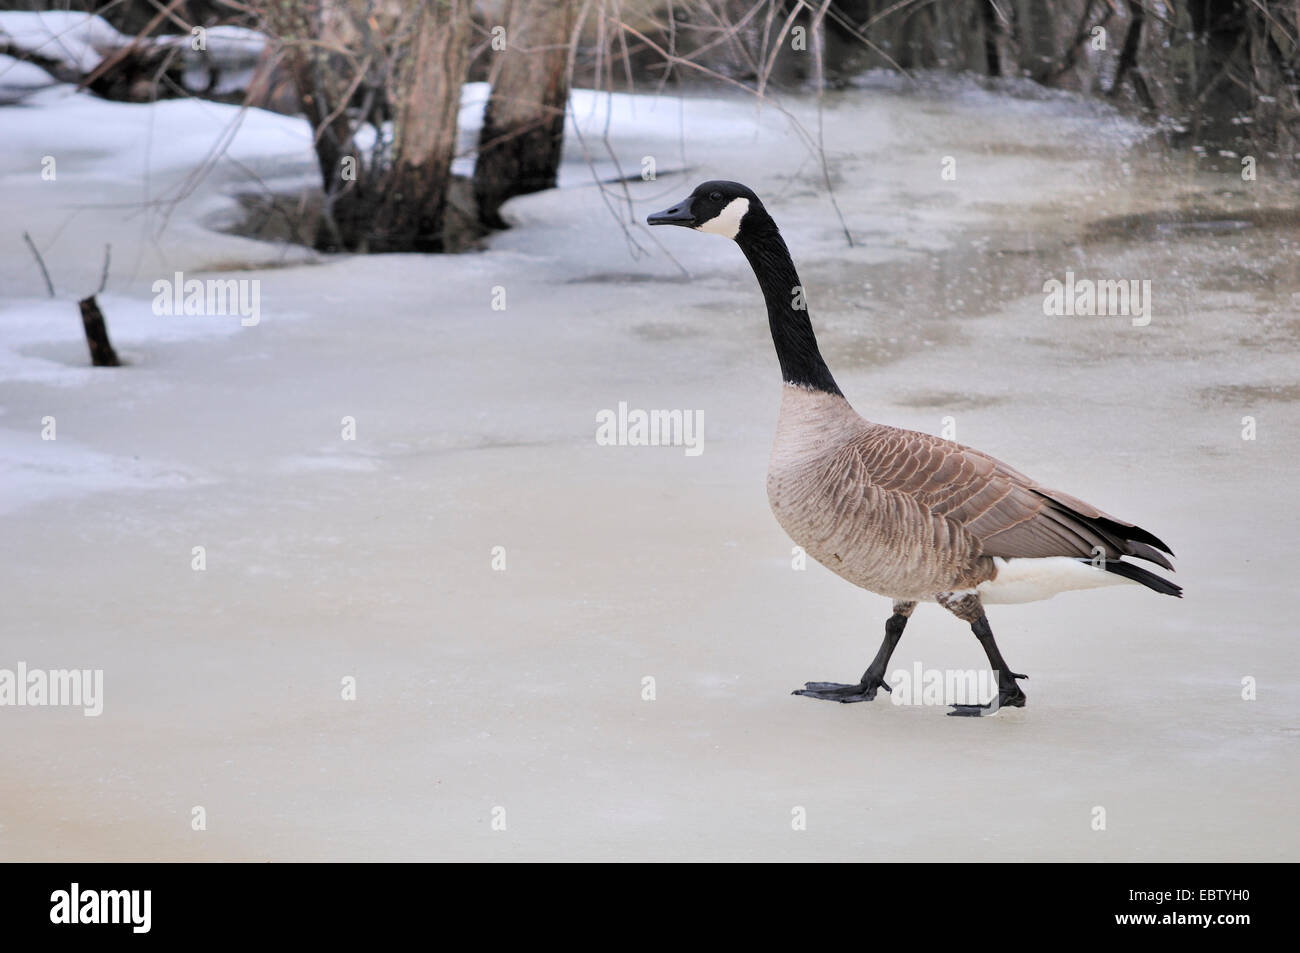 A Canada goose walking on ice waiting for the thaw. Stock Photo